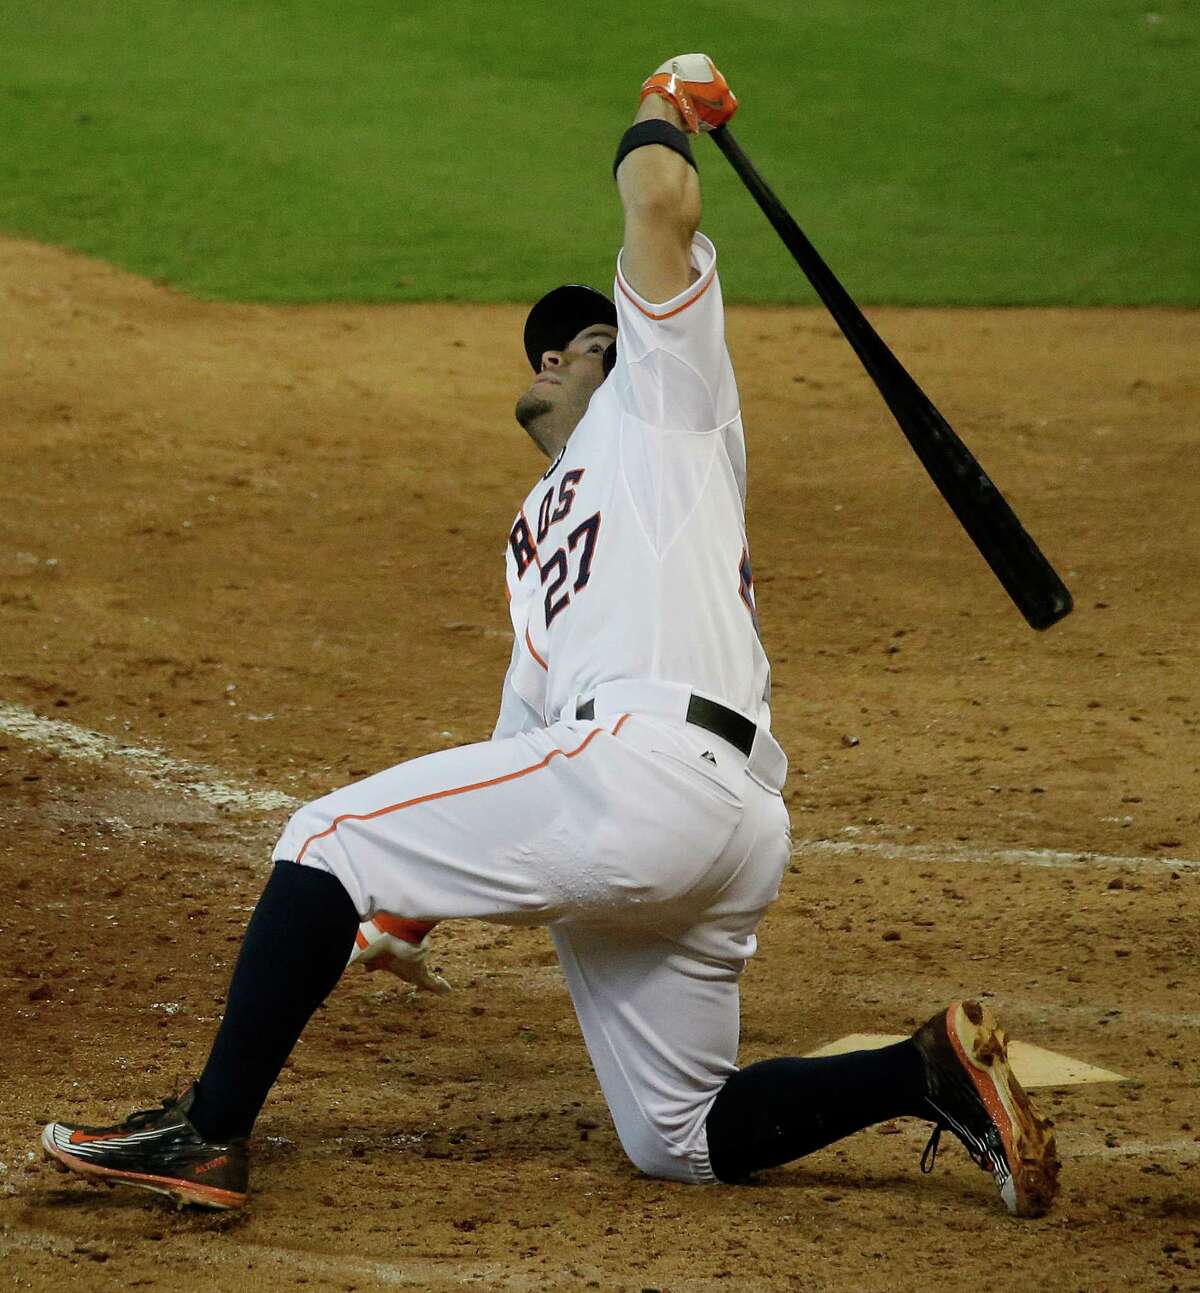 Houston Astros Jose Altuve slides to the ground as he pops out to third baseman Mike Moustakas in foul territory during the seventh inning of Game 3 of the American League Division Series at Minute Maid Park Sunday, Oct. 11, 2015, in Houston. ( Melissa Phillip / Houston Chronicle )